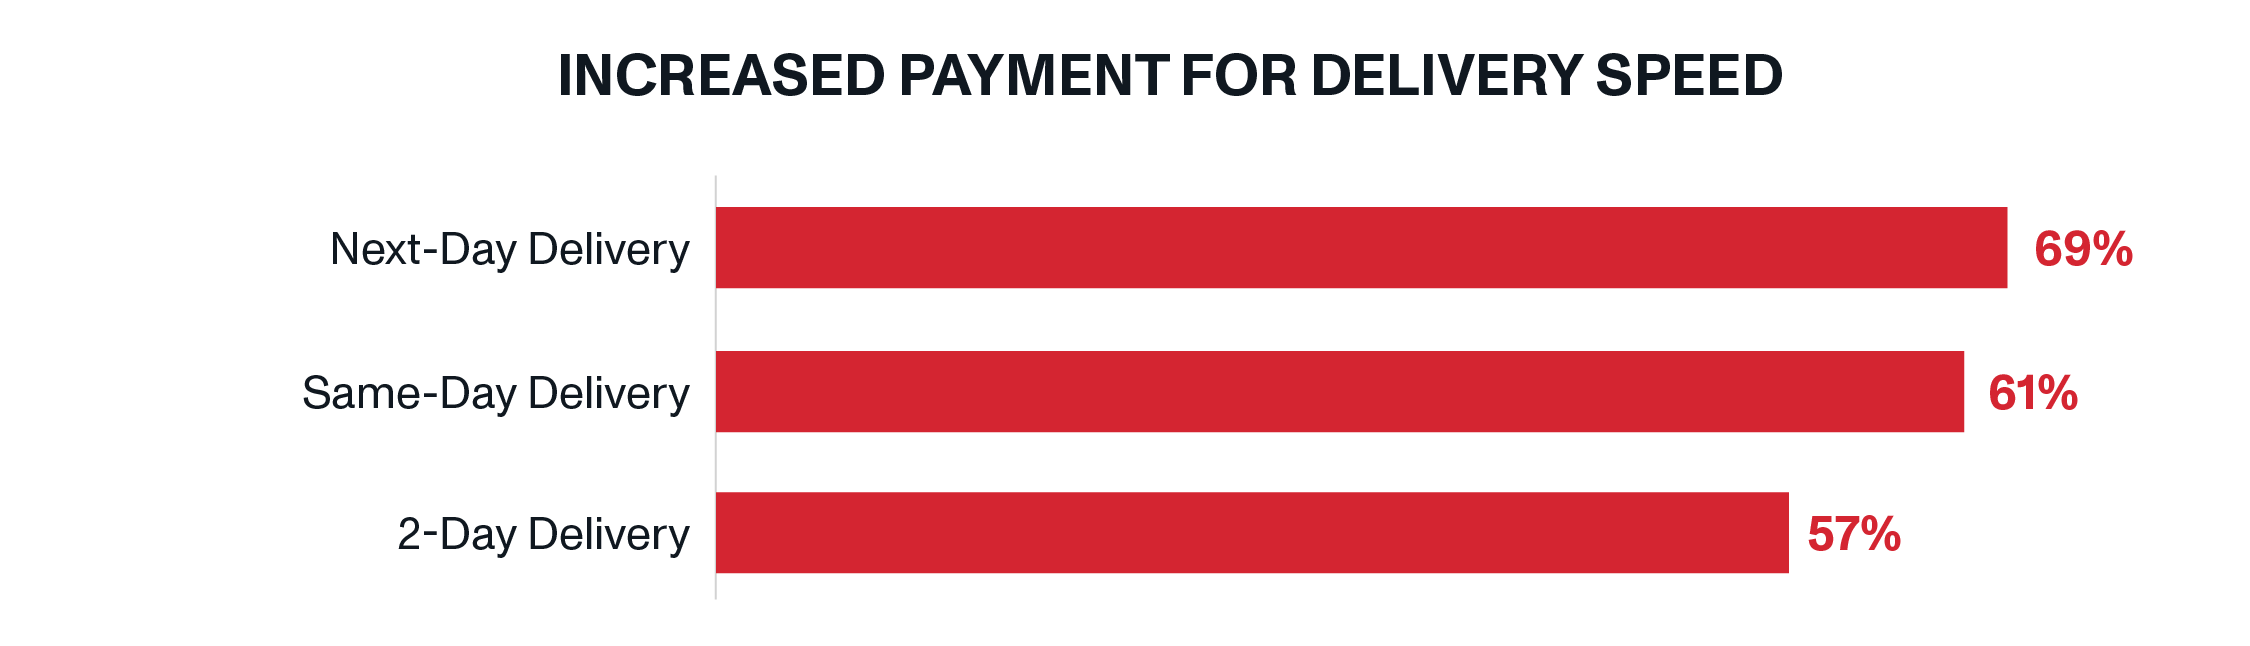 Most consumers who paid extra for faster delivery did so for next-day (69%) and same-day delivery (61%). 